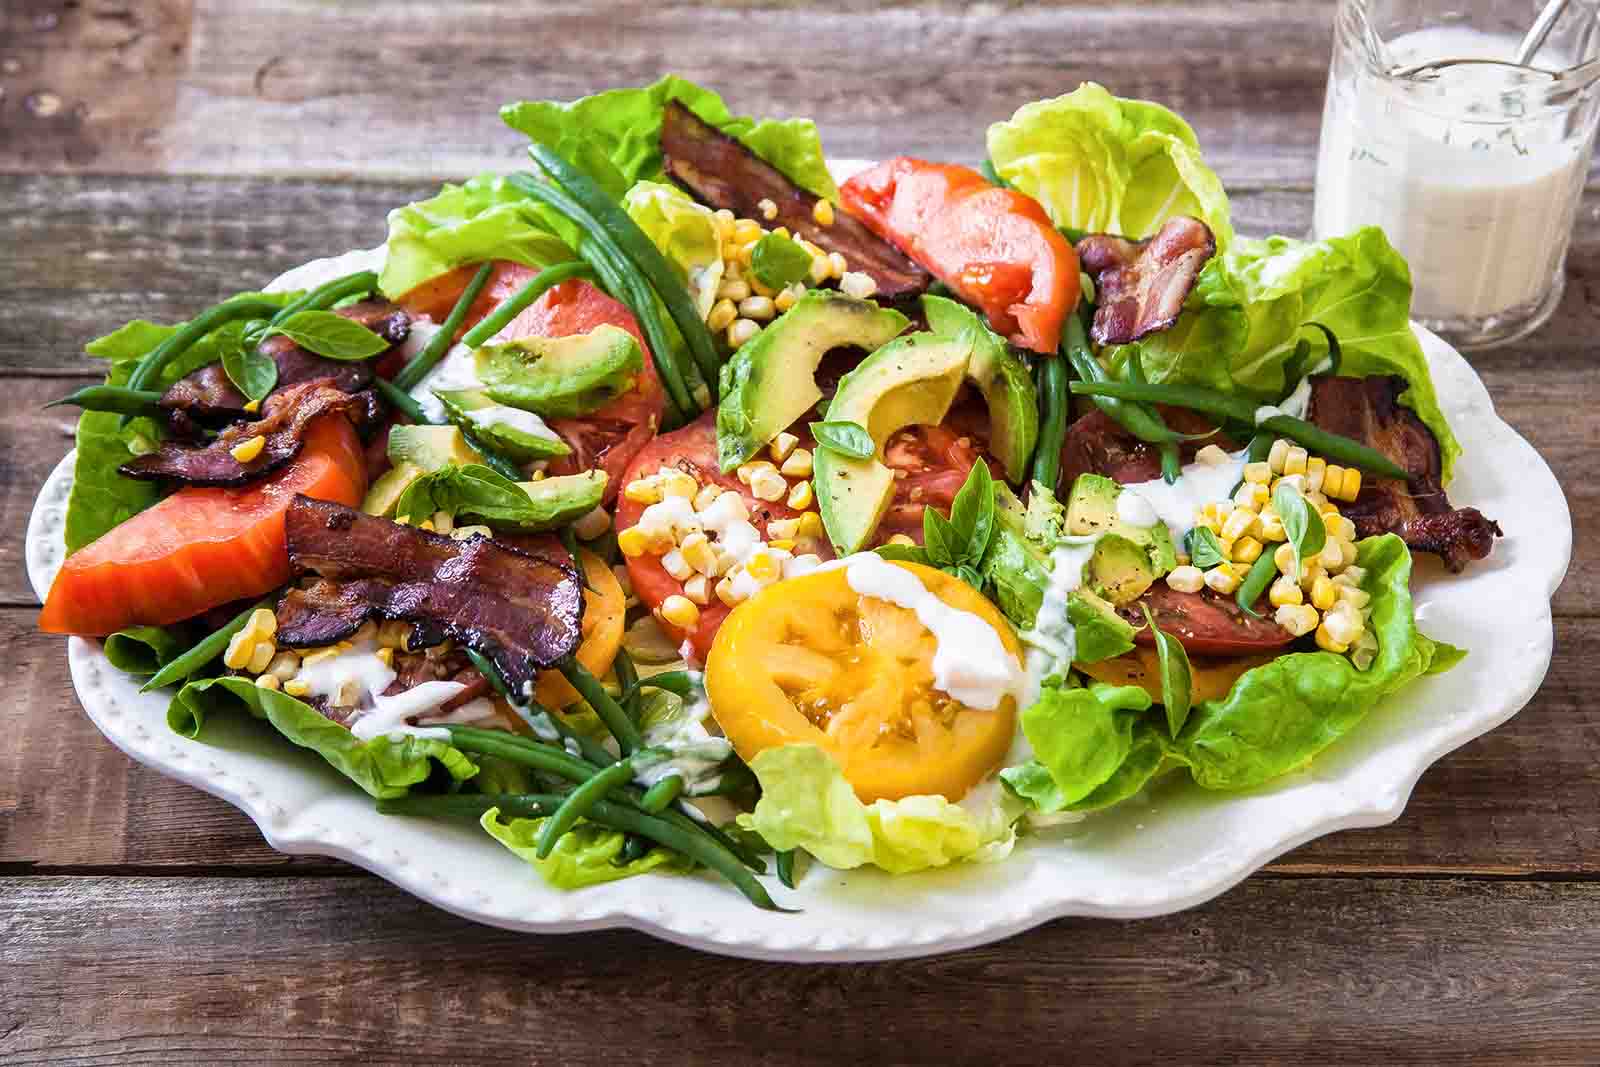 If You Were Born After 1970, There's No Way You're Passing This Food Quiz Salad